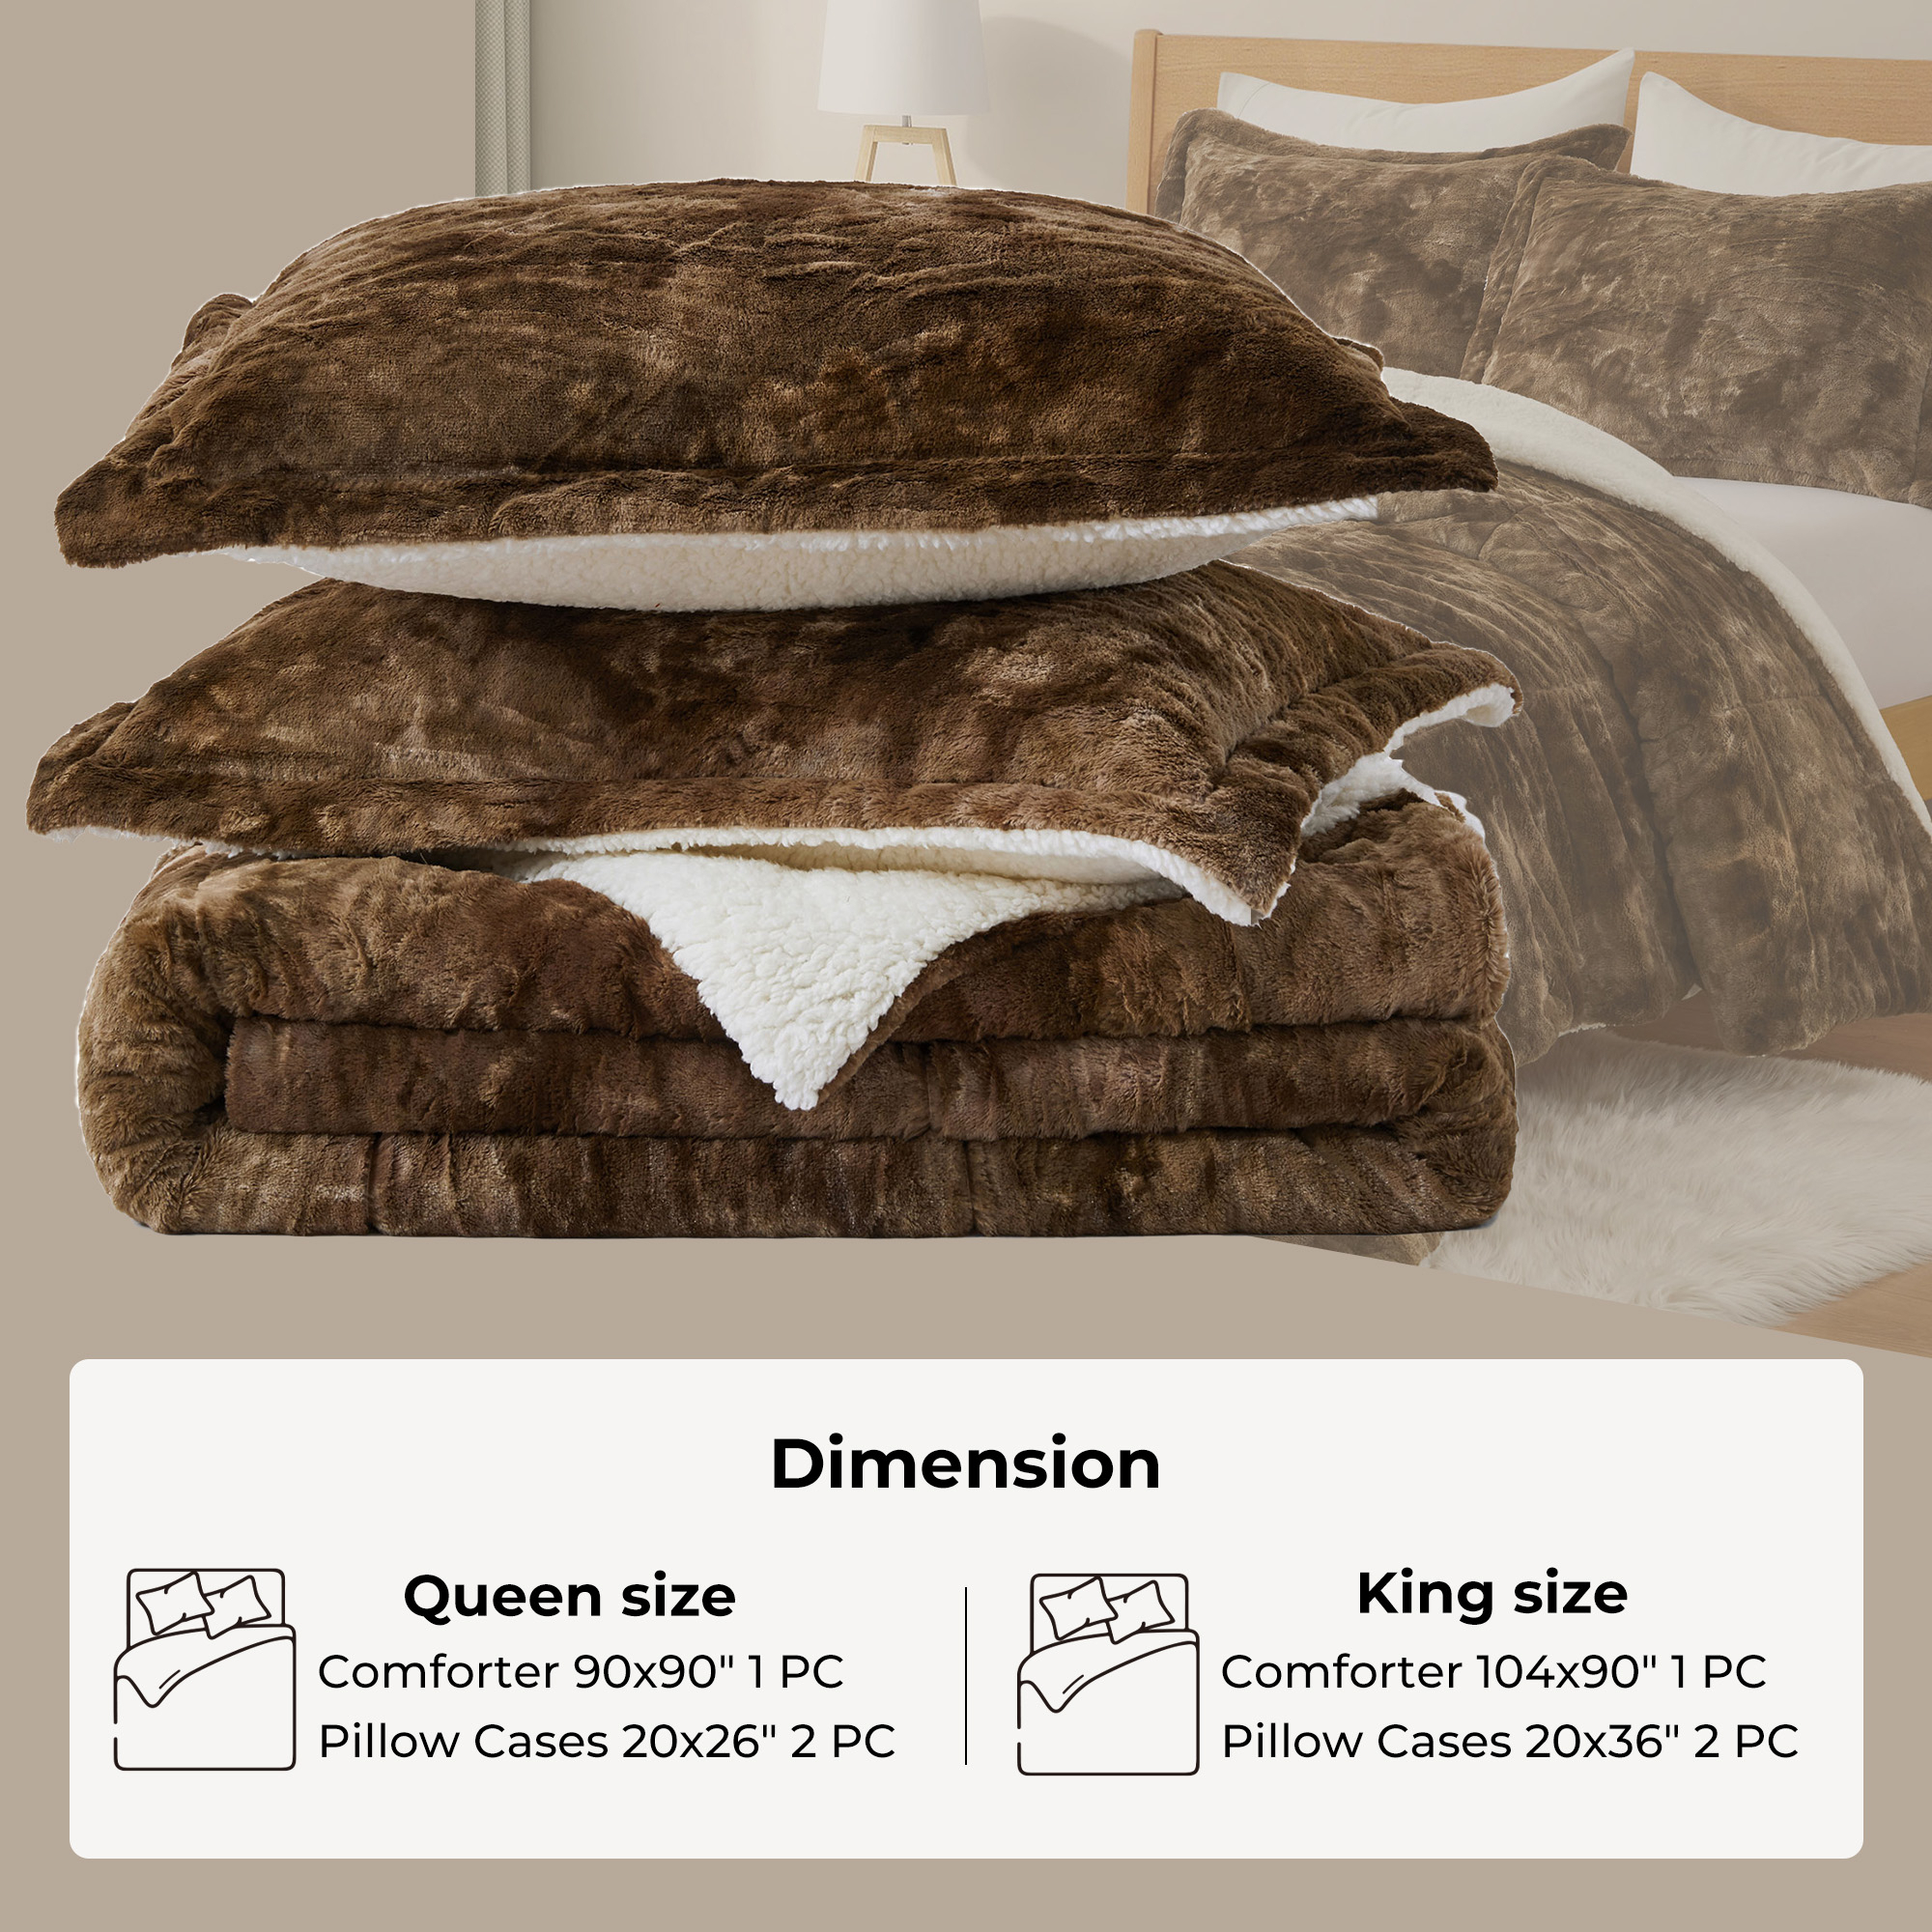 3 Piece All Season Comforter Set With Shams Reversible Faux Shearling-Down Alternative Comforter Set - Tiger Brown, Queen Size-9090